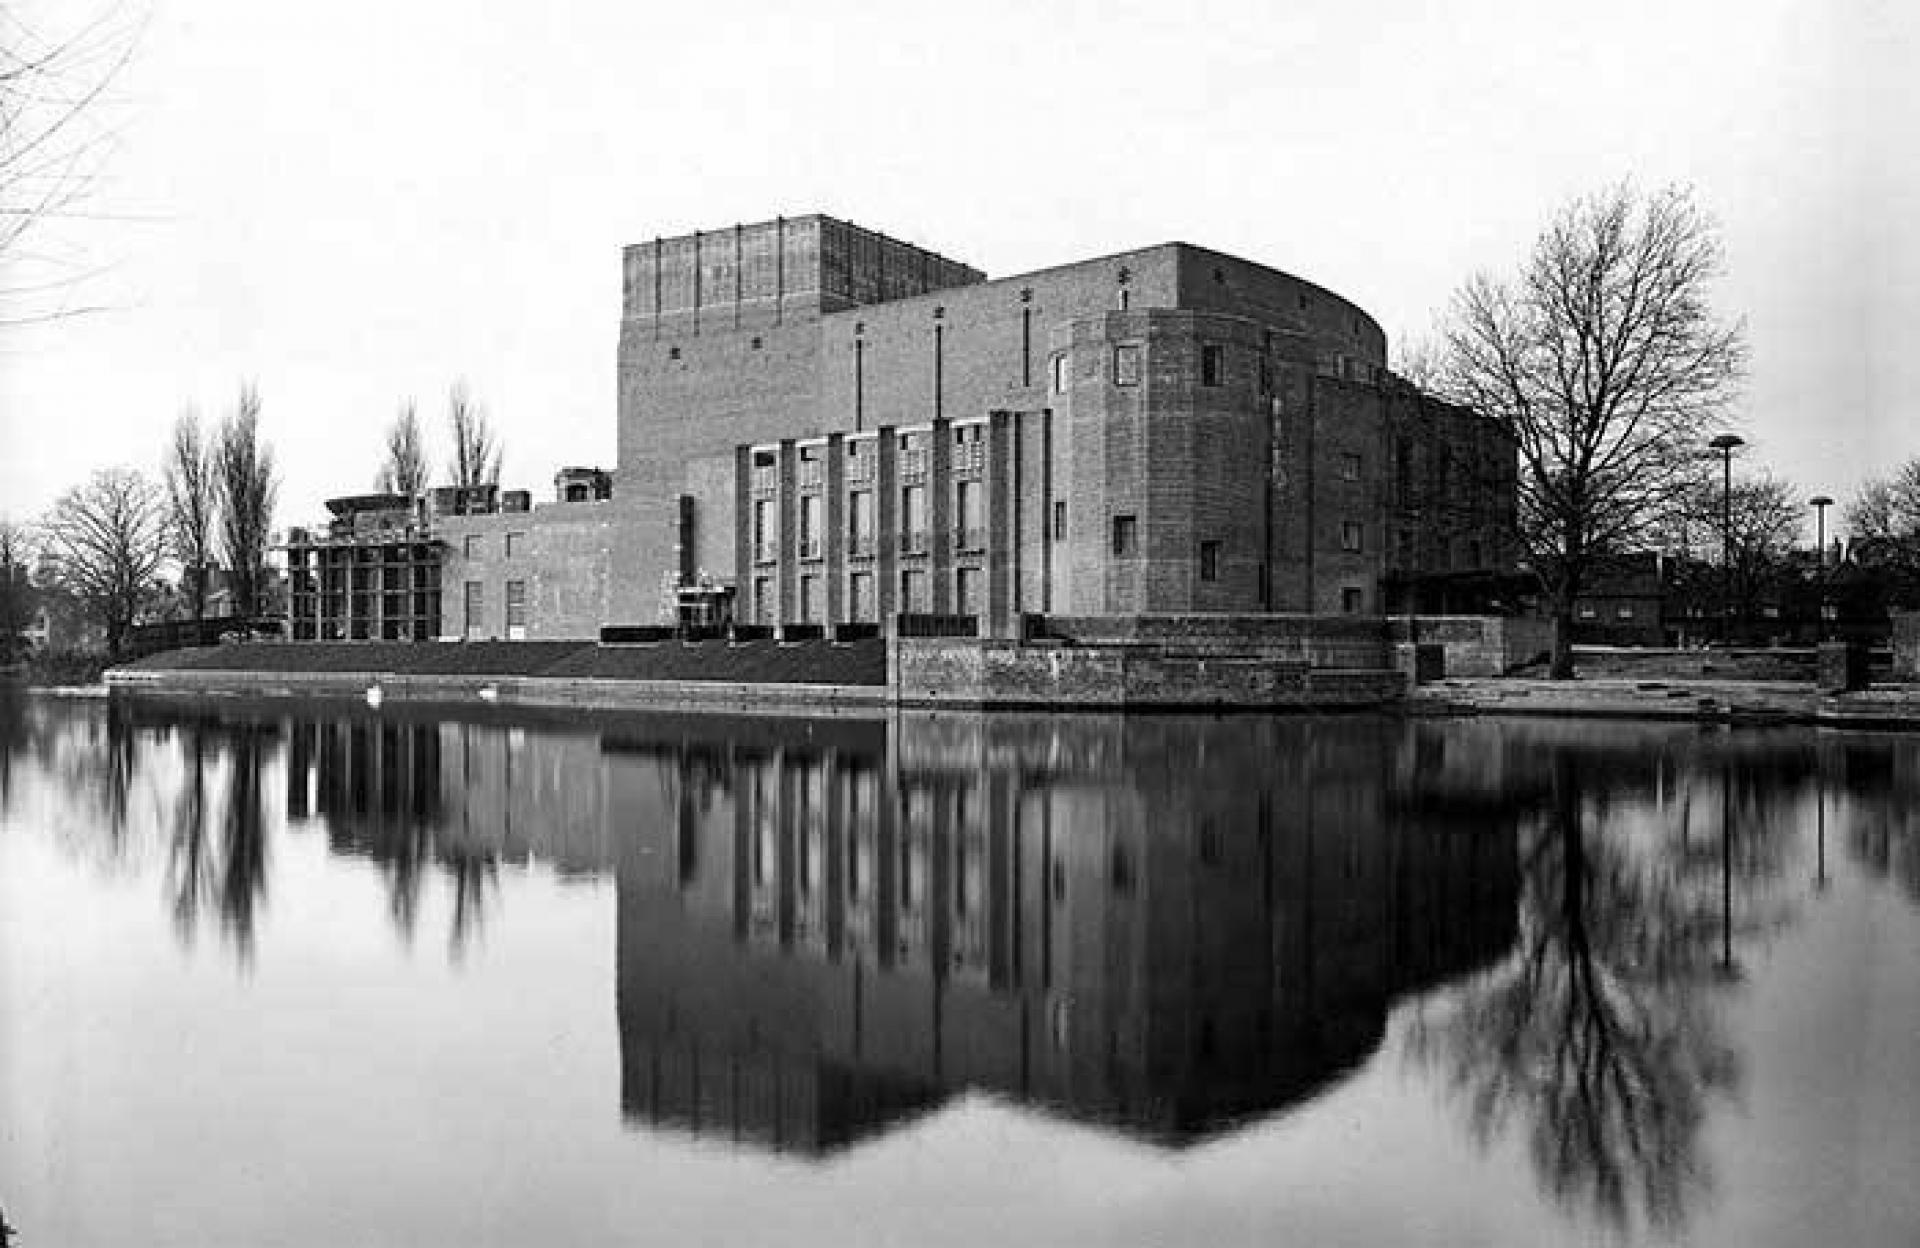 Elisabeth Scott’s competition design for the Shakespeare Memorial Theatre in Stratford-upon-Avon (1927) marked the beginning of a breakthrough for women architects. | Photo via Architecture.com - RIBA Collections